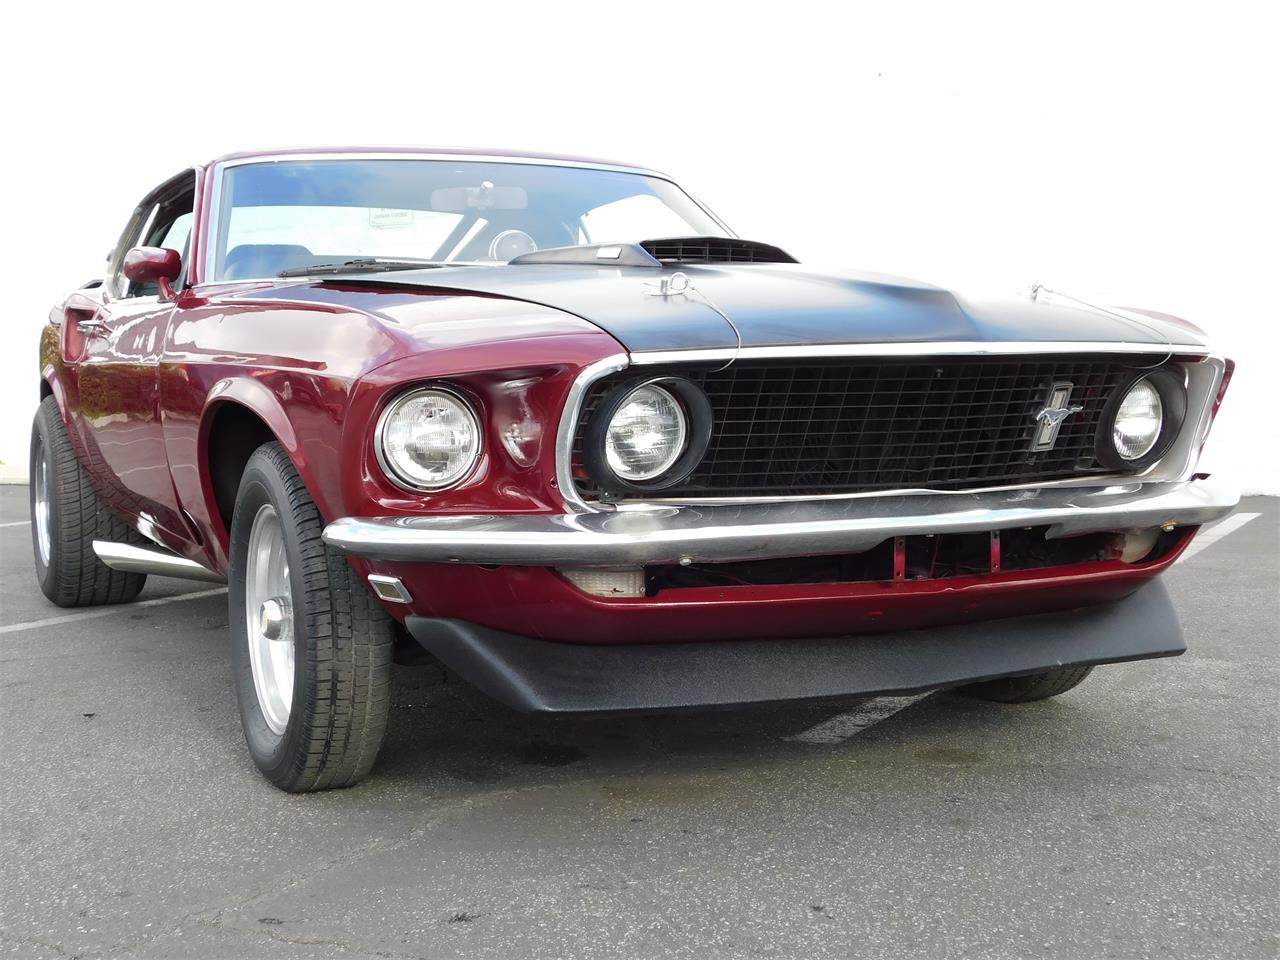 1969 Ford Mustang Mach 1 for Sale | ClassicCars.com | CC-930761